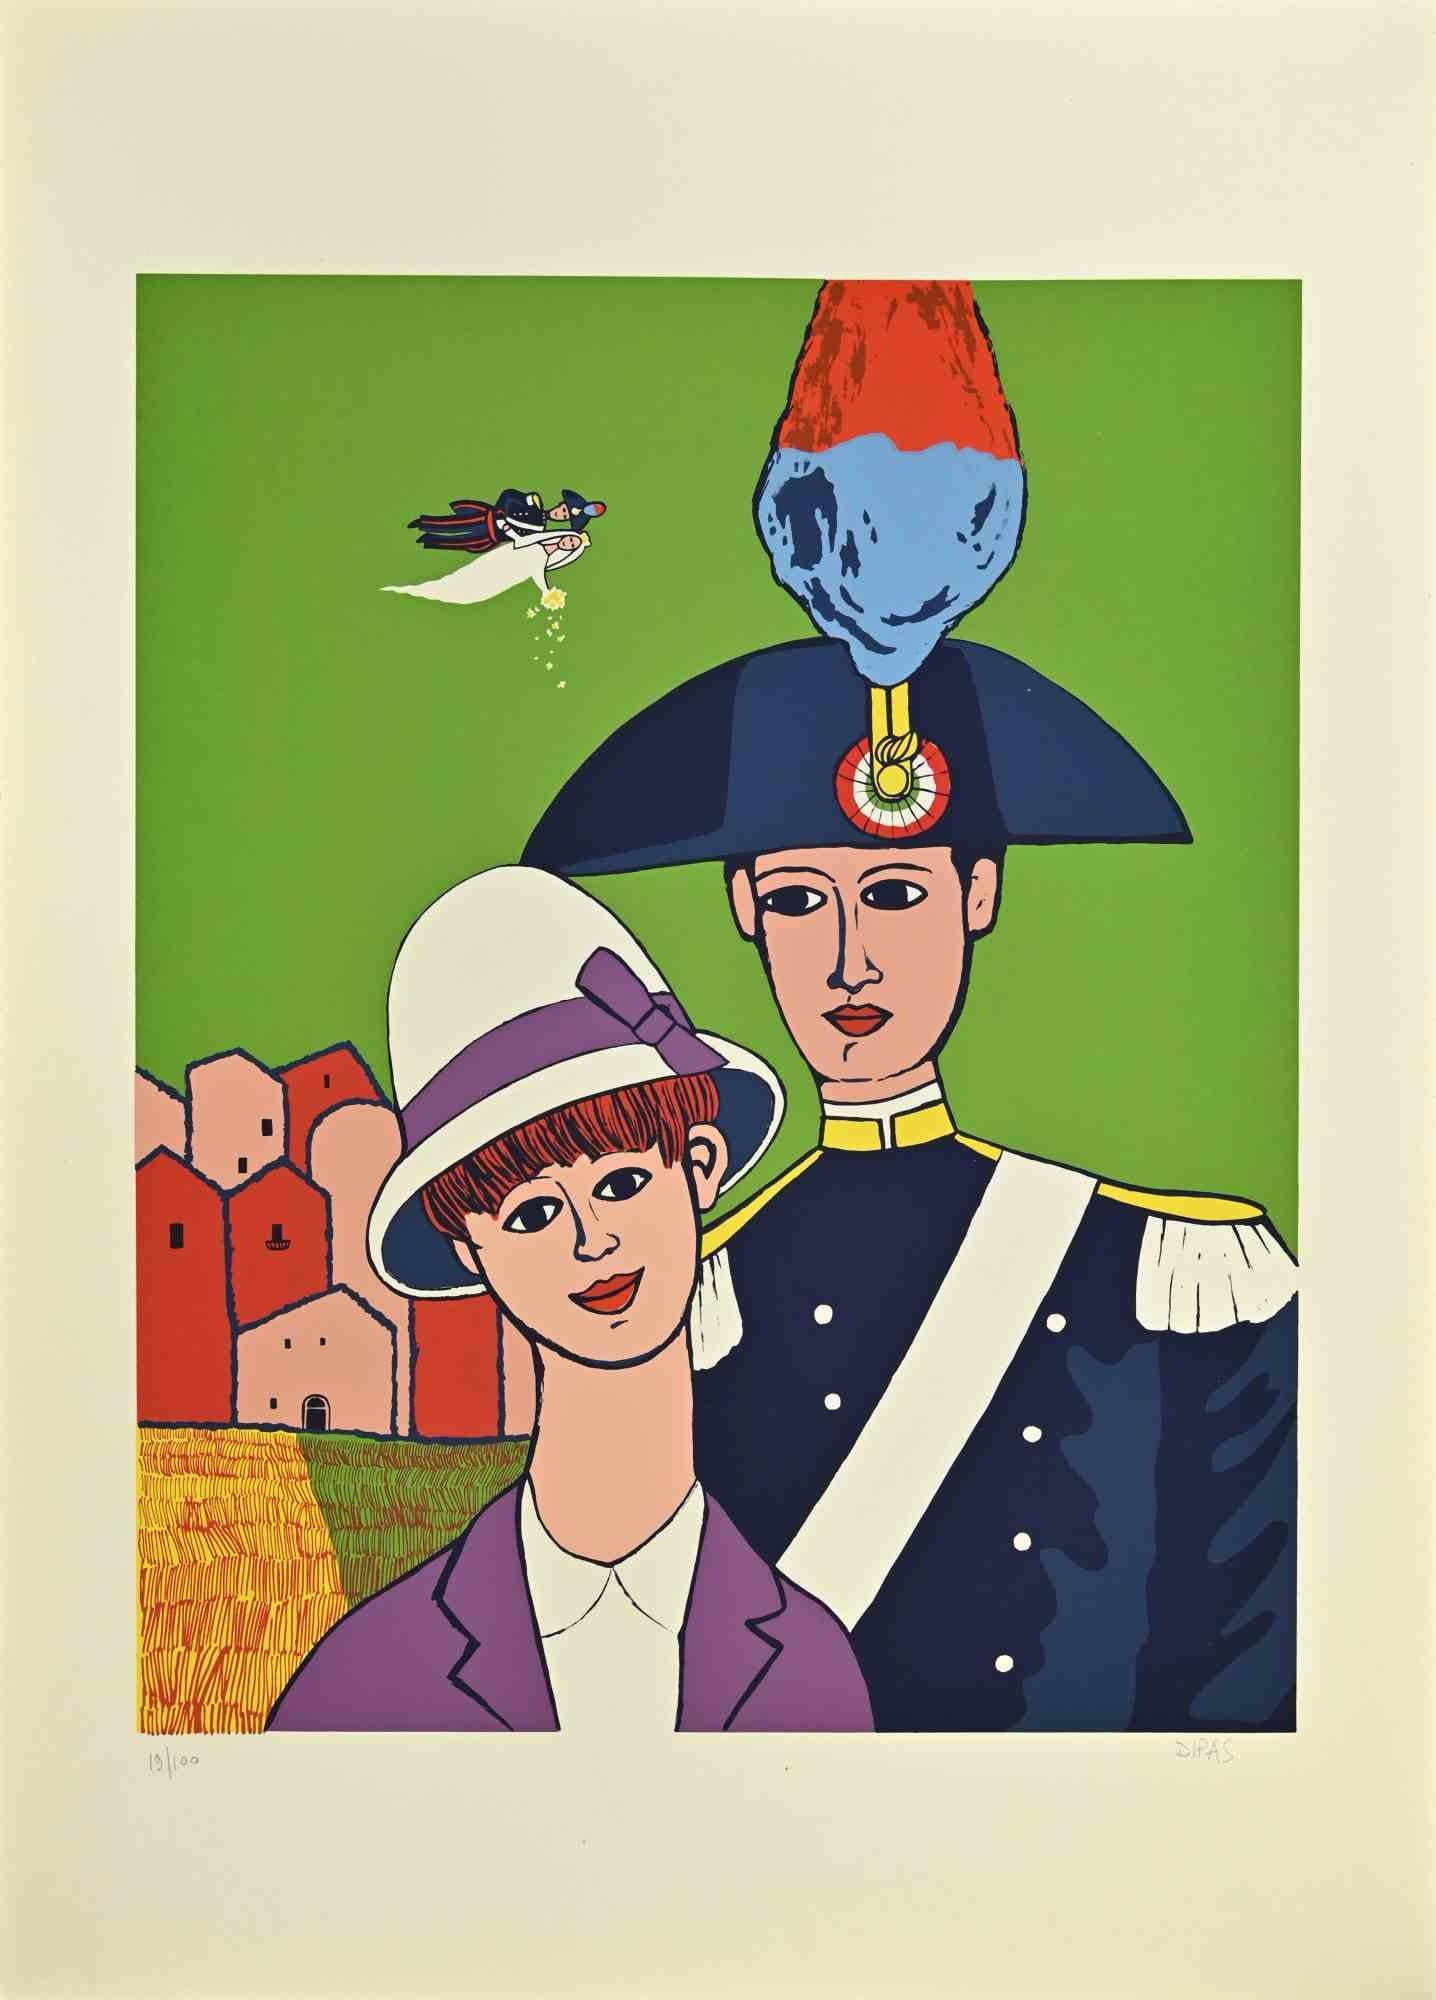 Carabineer in love is a contemporary artwork realized by the artist Dipas in the 1970s.

Mixed colored serigraph.

Hand signed on the lower right margin.

Numbered on the lower left margin.

Edition of 19/100.

